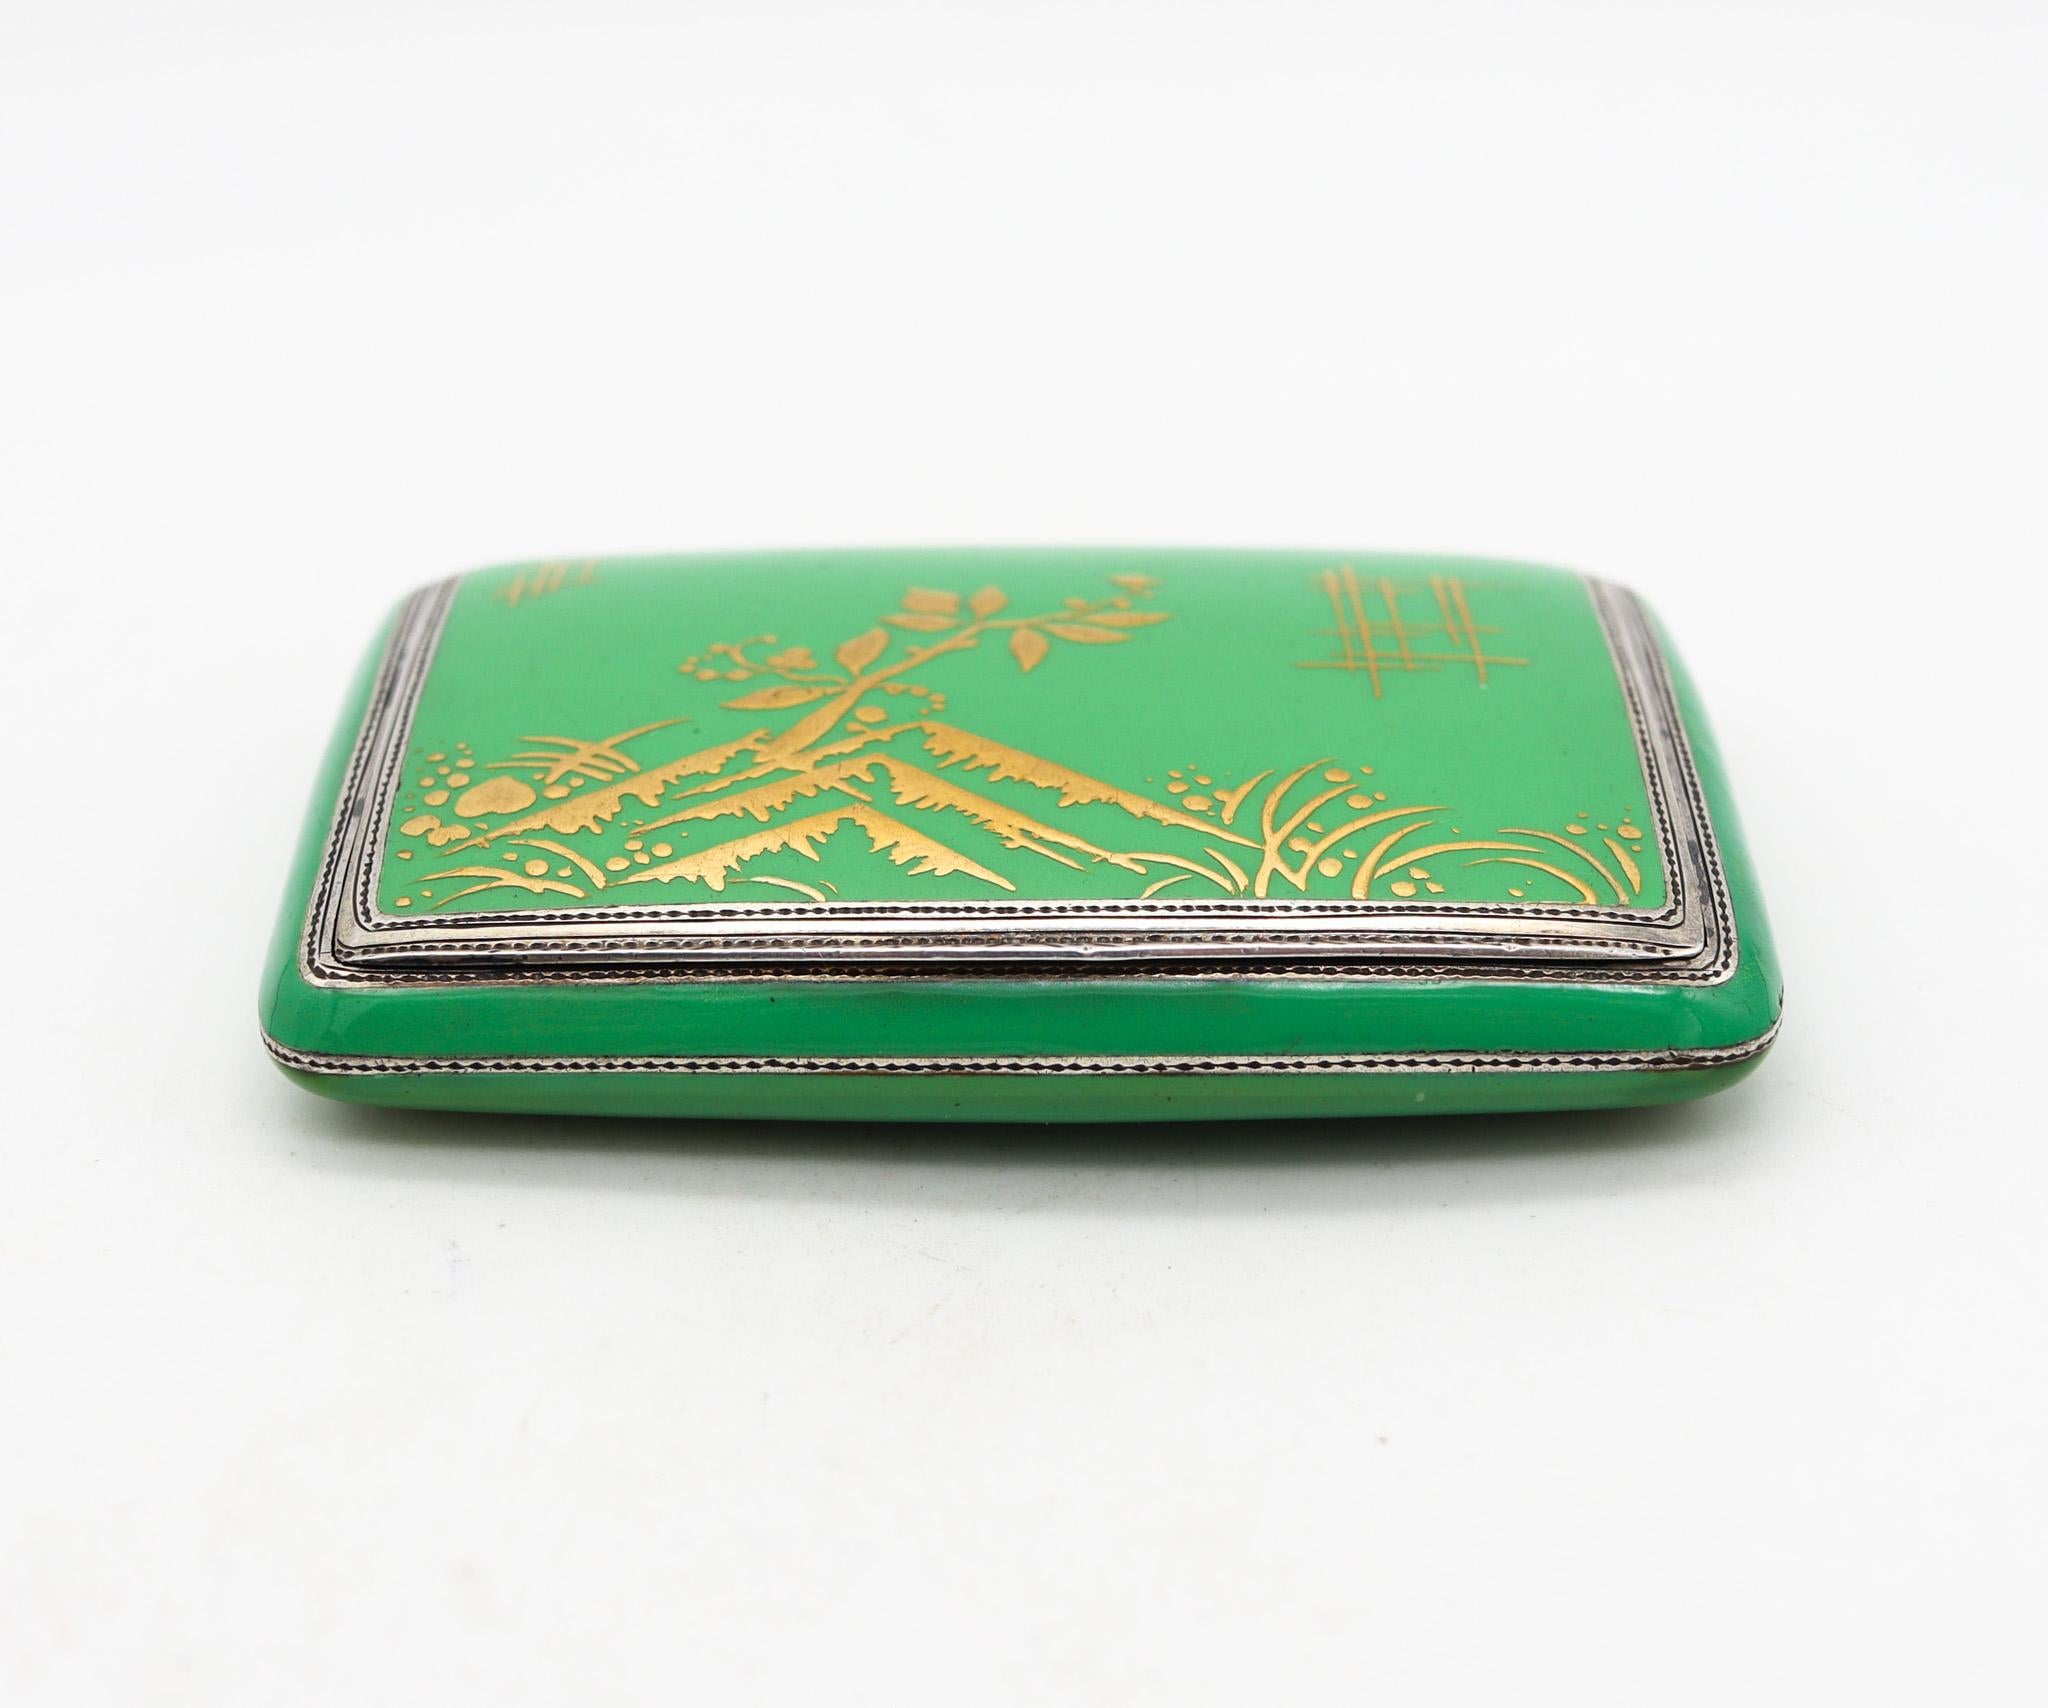 Enameled box by Louis Kuppenheim for Alfred Dunhill. 

An extraordinary rare box, created in the city of Pforzheim Germany during the art deco period, back in the late 1920's. This superb elegant case box is closely to mint condition, designed with